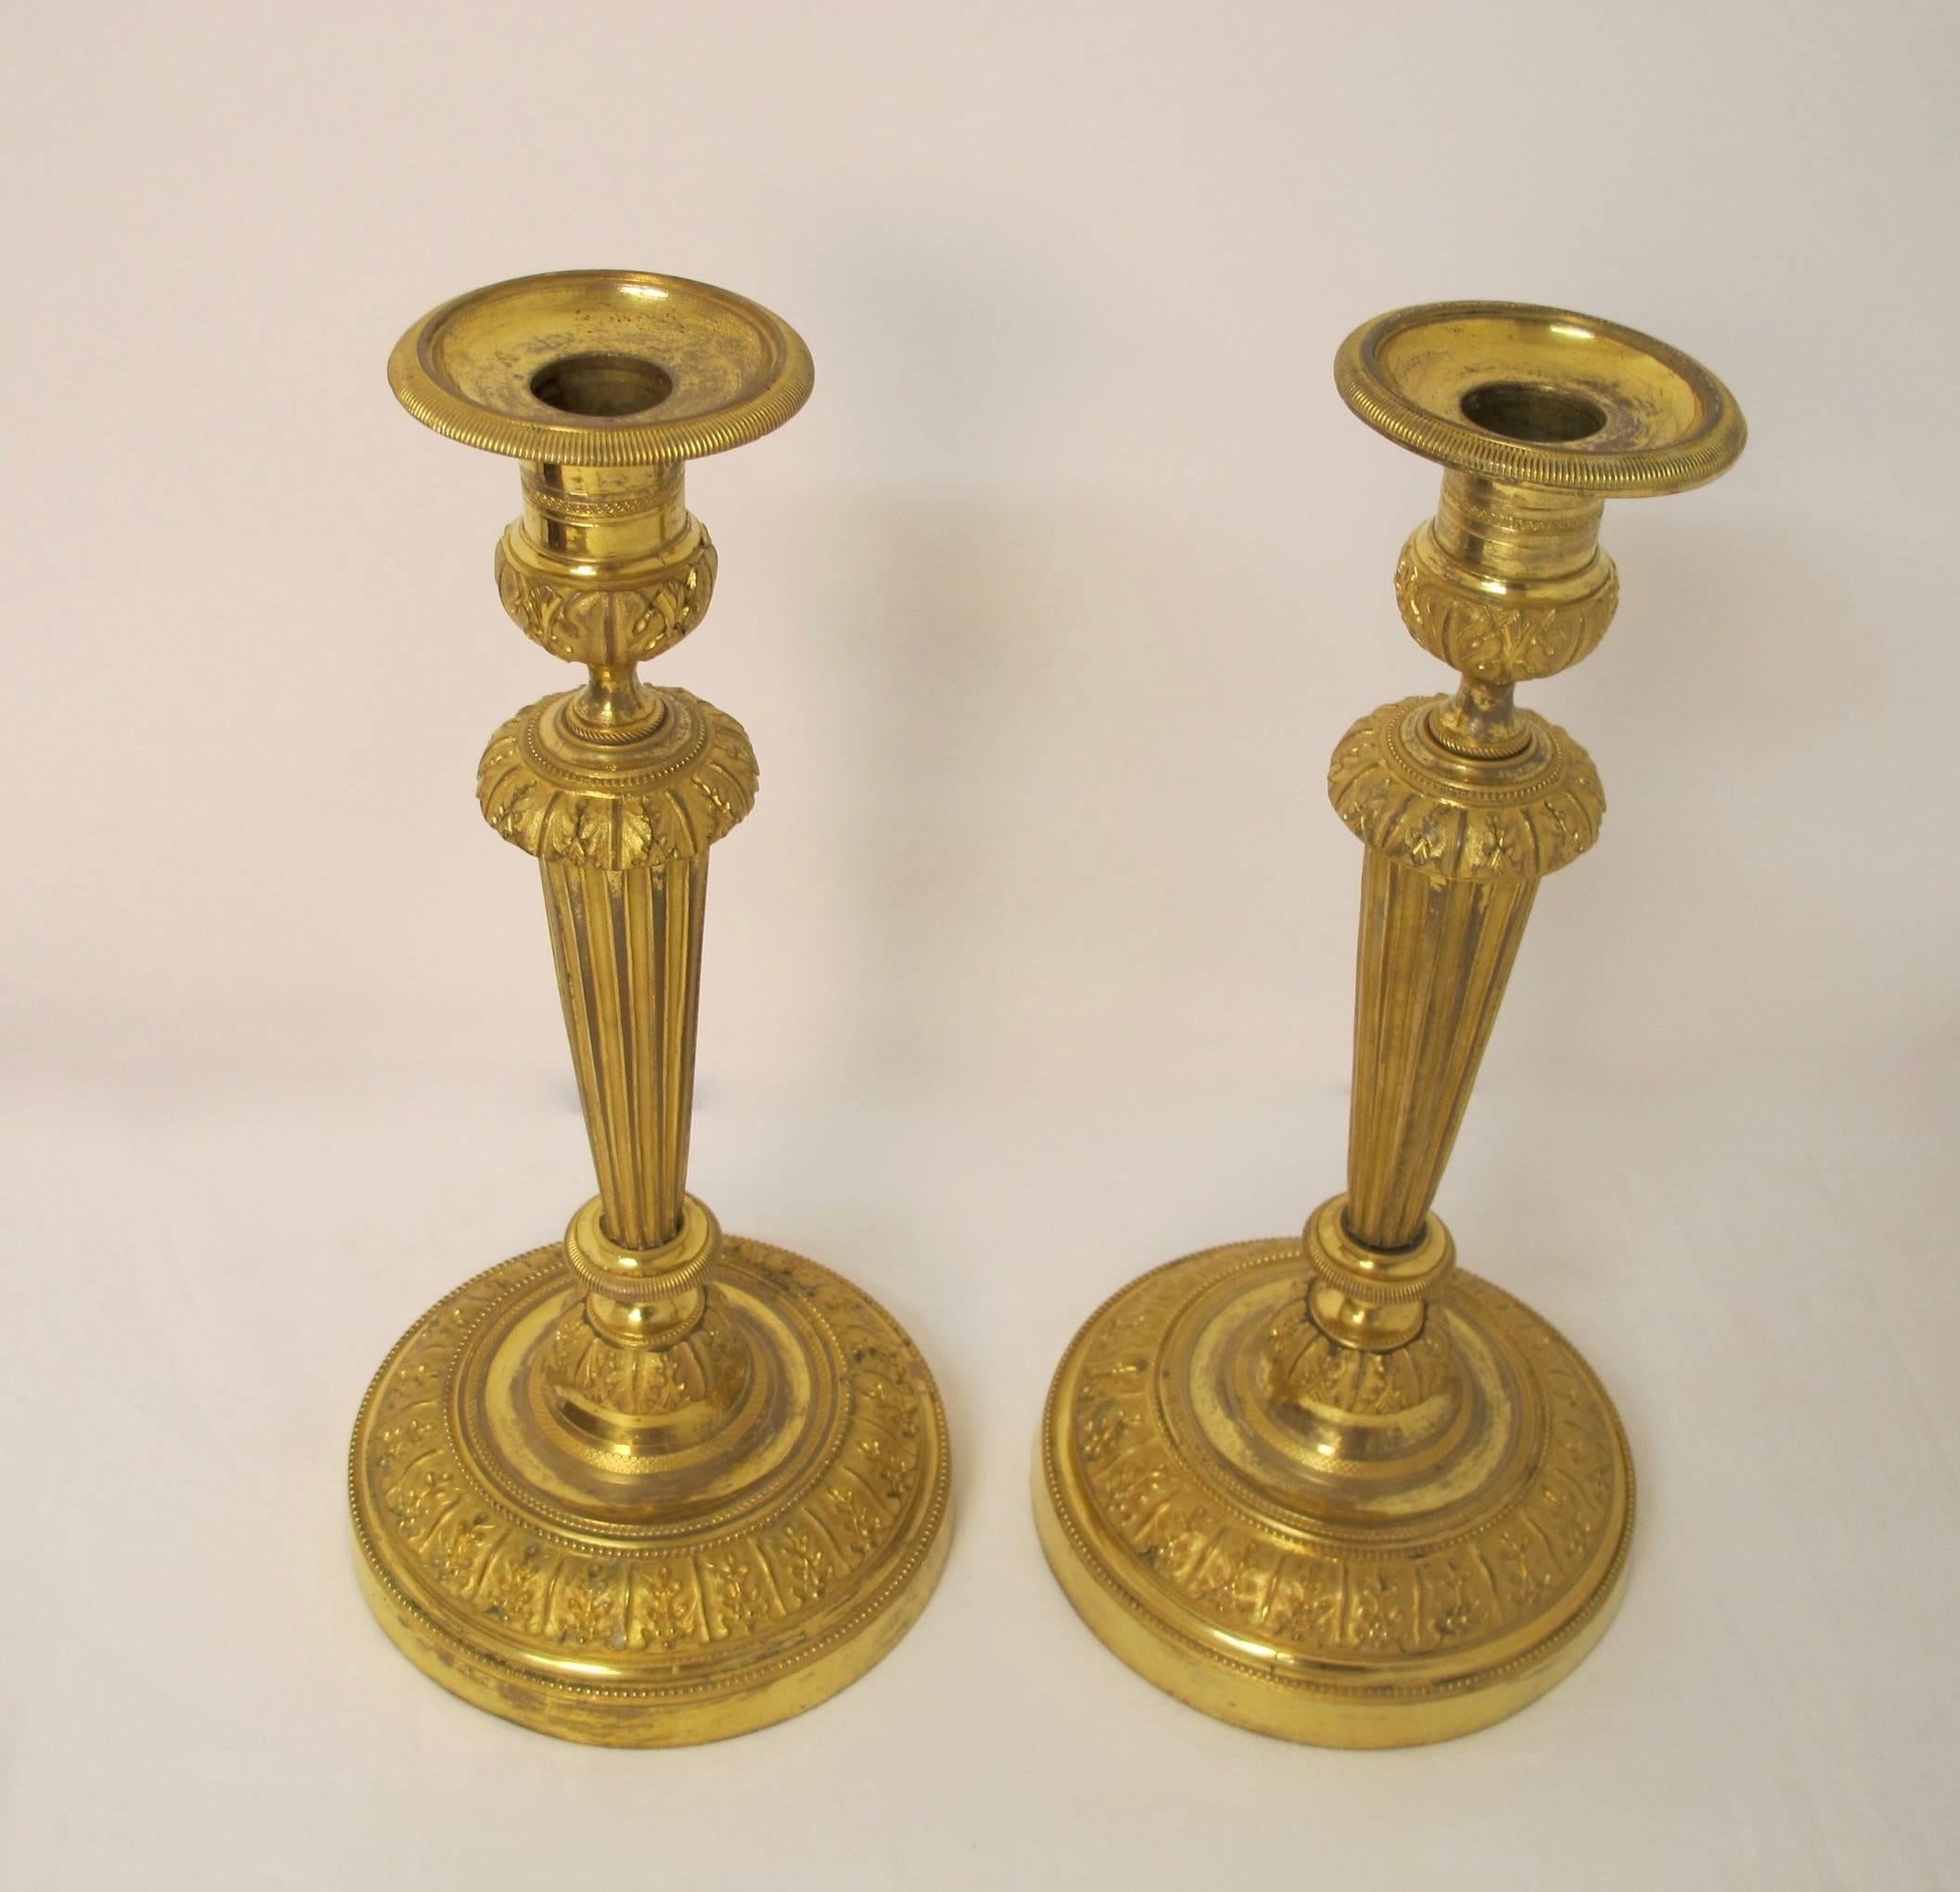 Impressive pair of Louis XVI style gilt bronze candlesticks with bright cut floral design, fluted tapering column. Standing straight and tall with wear of the gilding in areas. To be expected given the age, French, circa 1860.
These have never been